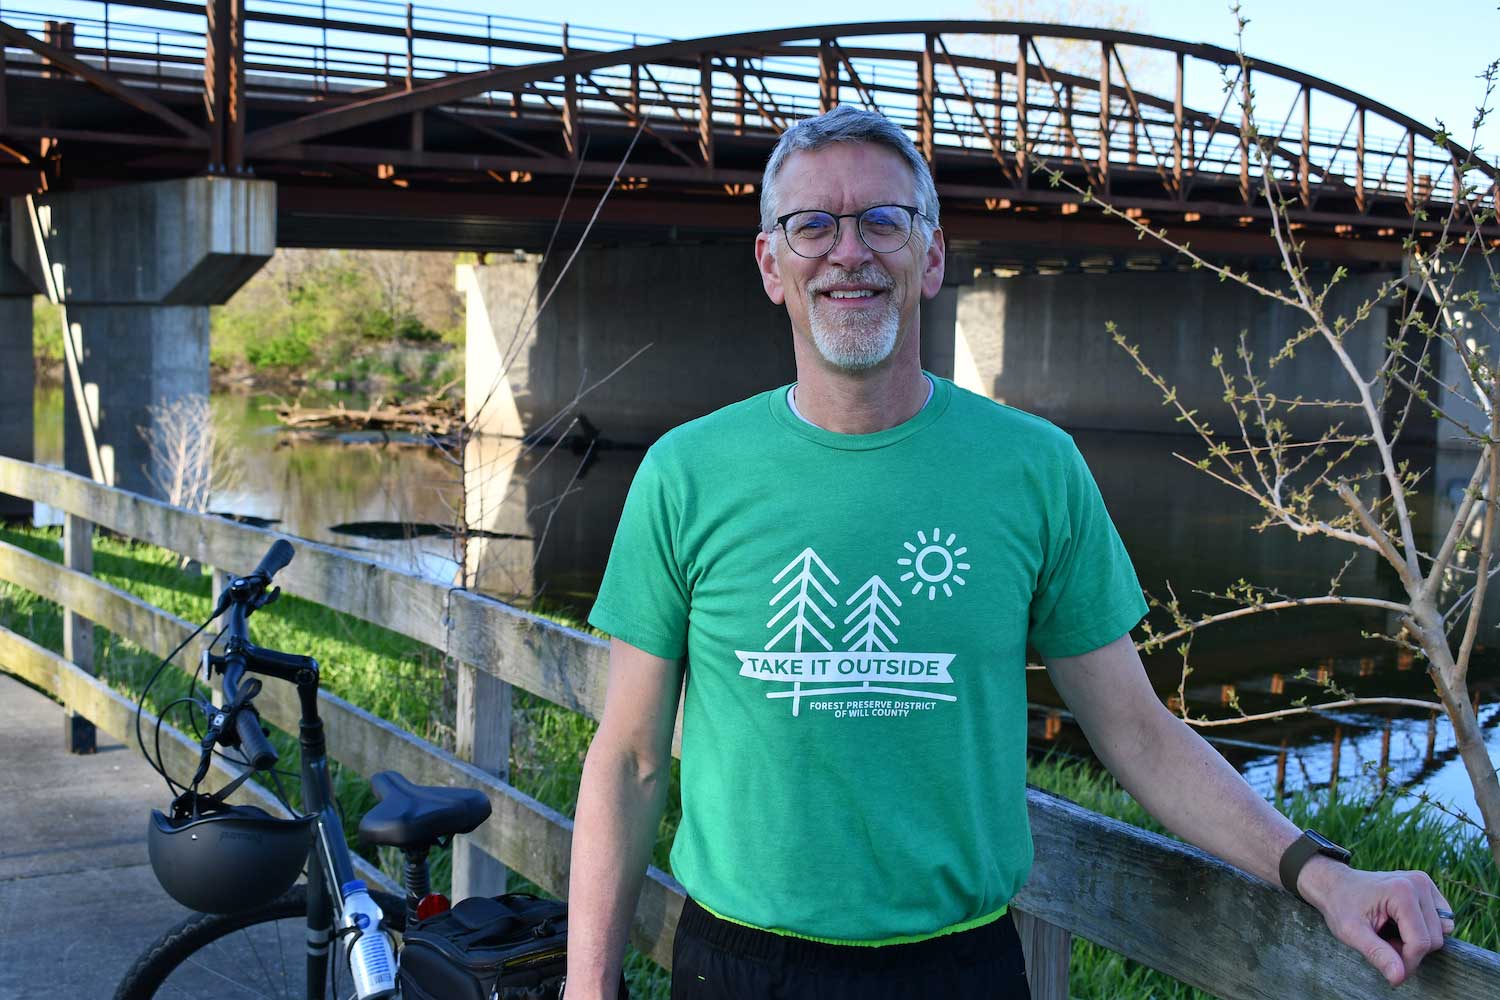 A man next to a bike standing along a trail that runs along a river with a bridge in the background.